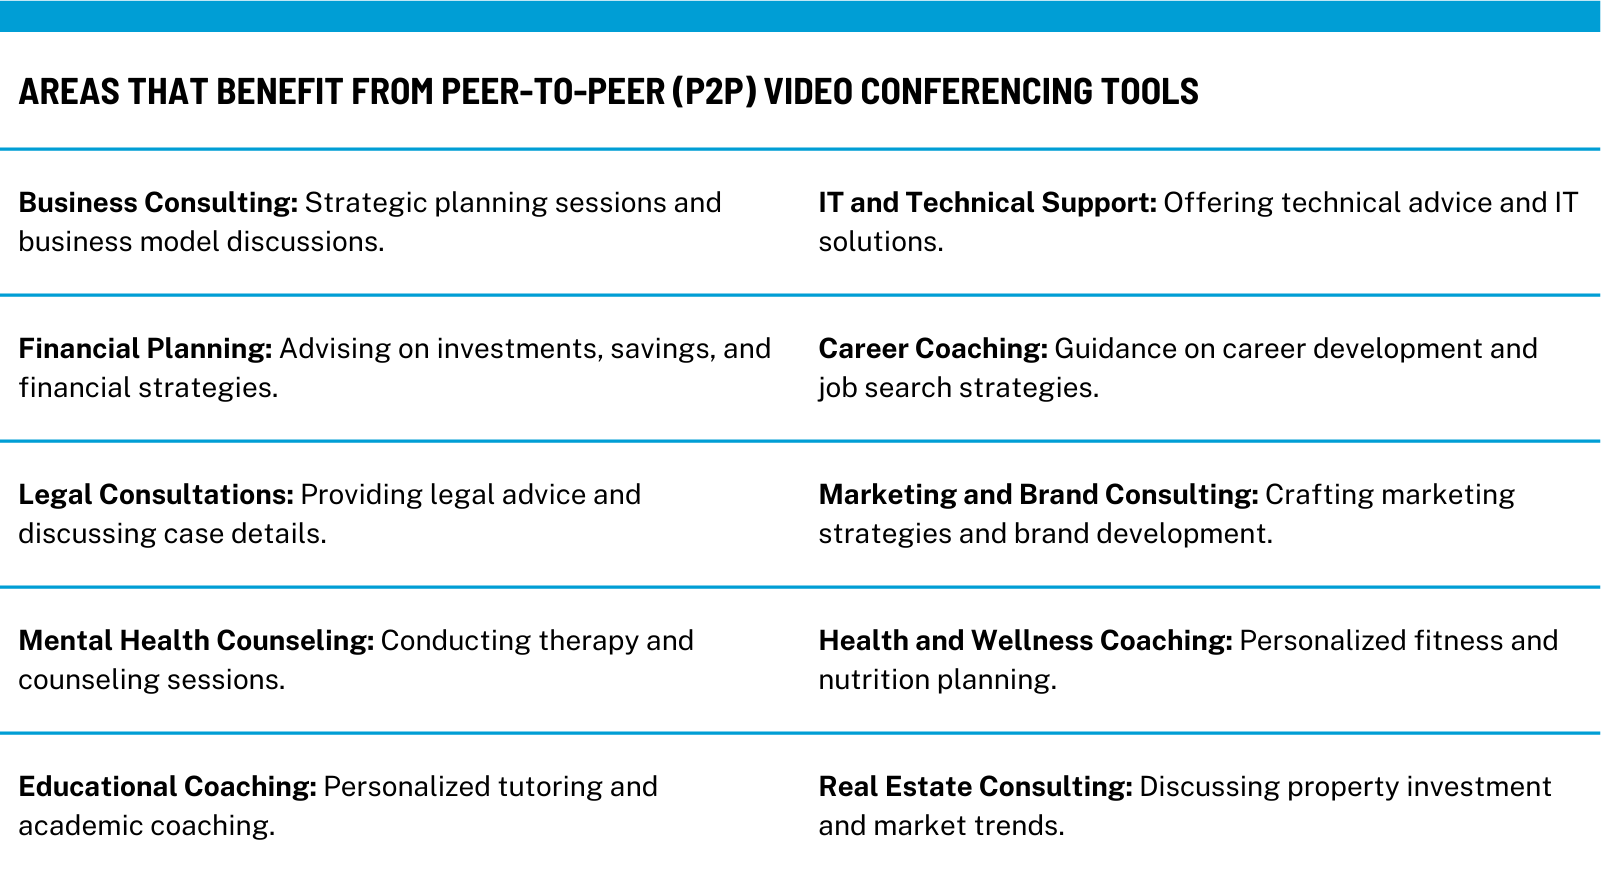 Infographic illustrating various professional services that benefit from P2P video conferencing, including business consulting, financial planning, legal consultations, career coaching, marketing and brand consulting, mental health counseling, educational coaching, health and wellness coaching, IT and technical support, and real estate consulting.